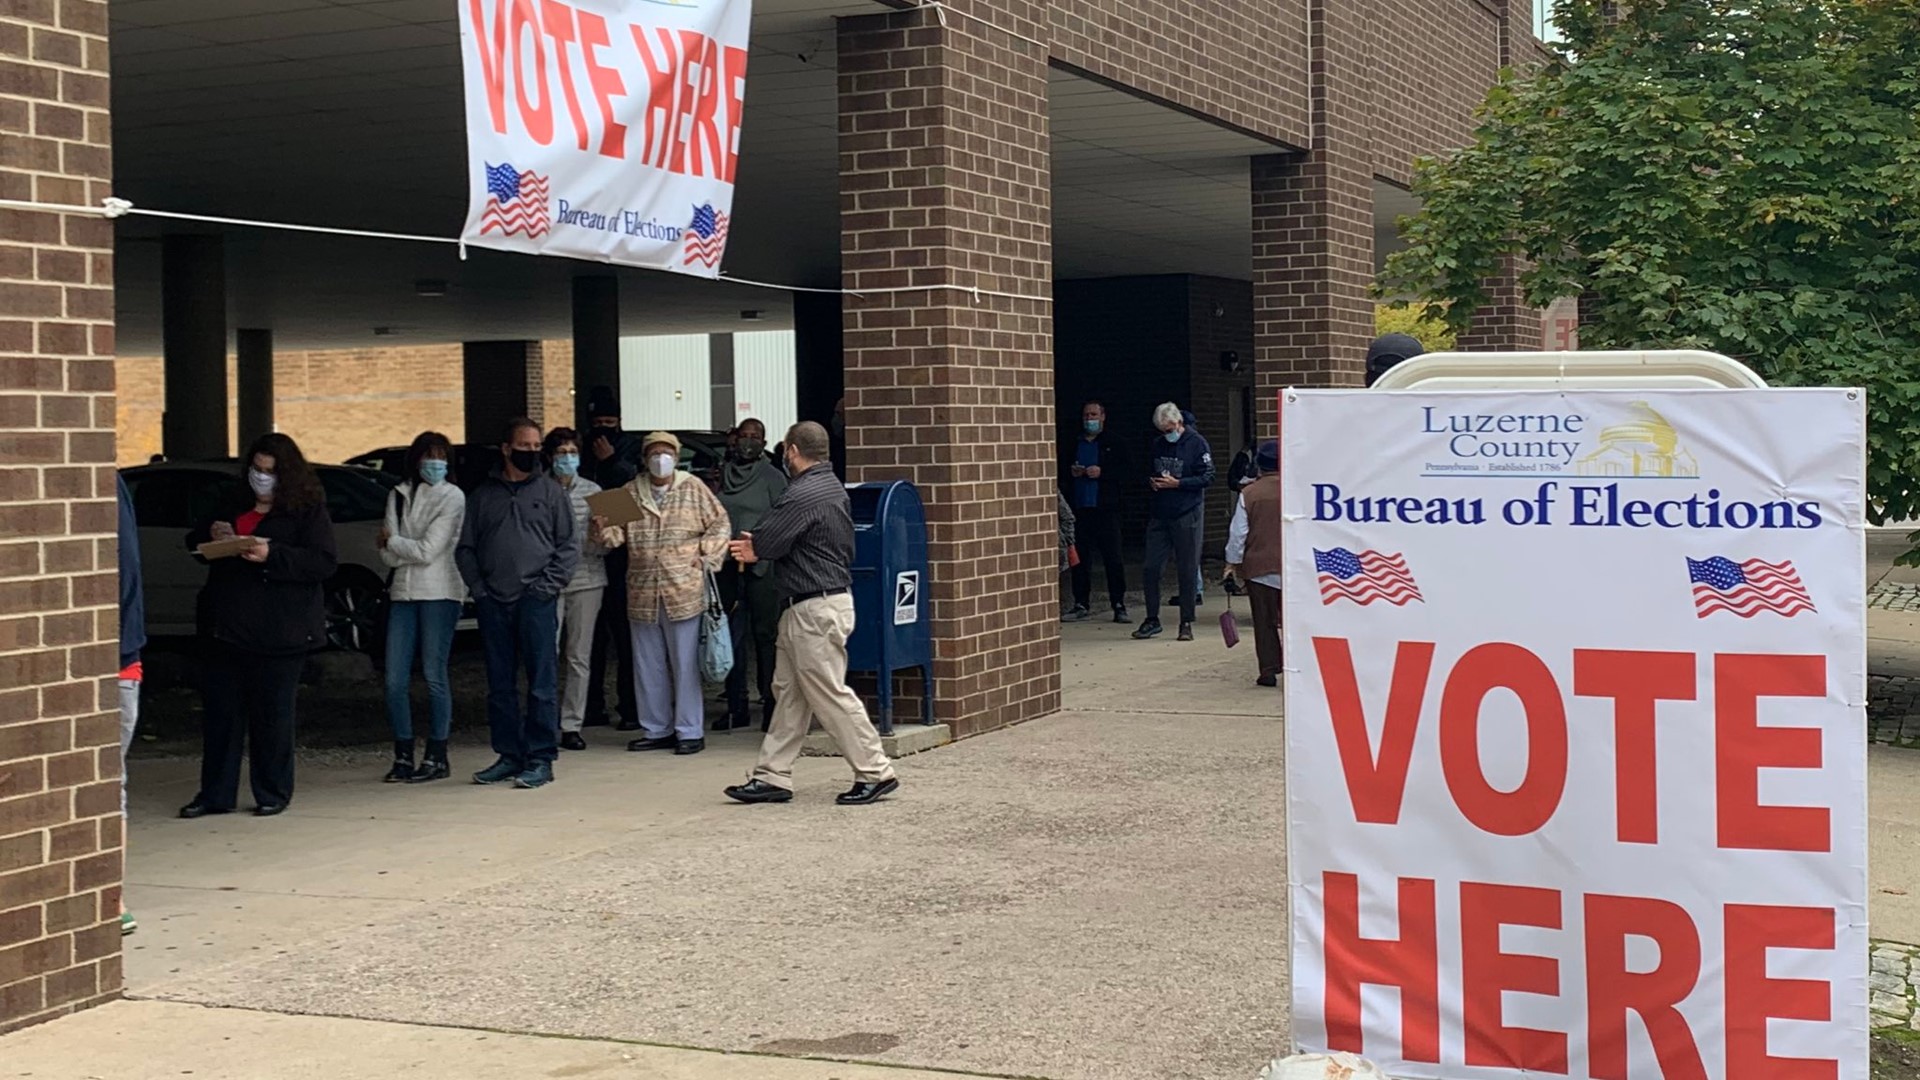 Dozens lined up to vote early at the Luzerne County Bureau of Elections at Penn Place in Wilkes-Barre.